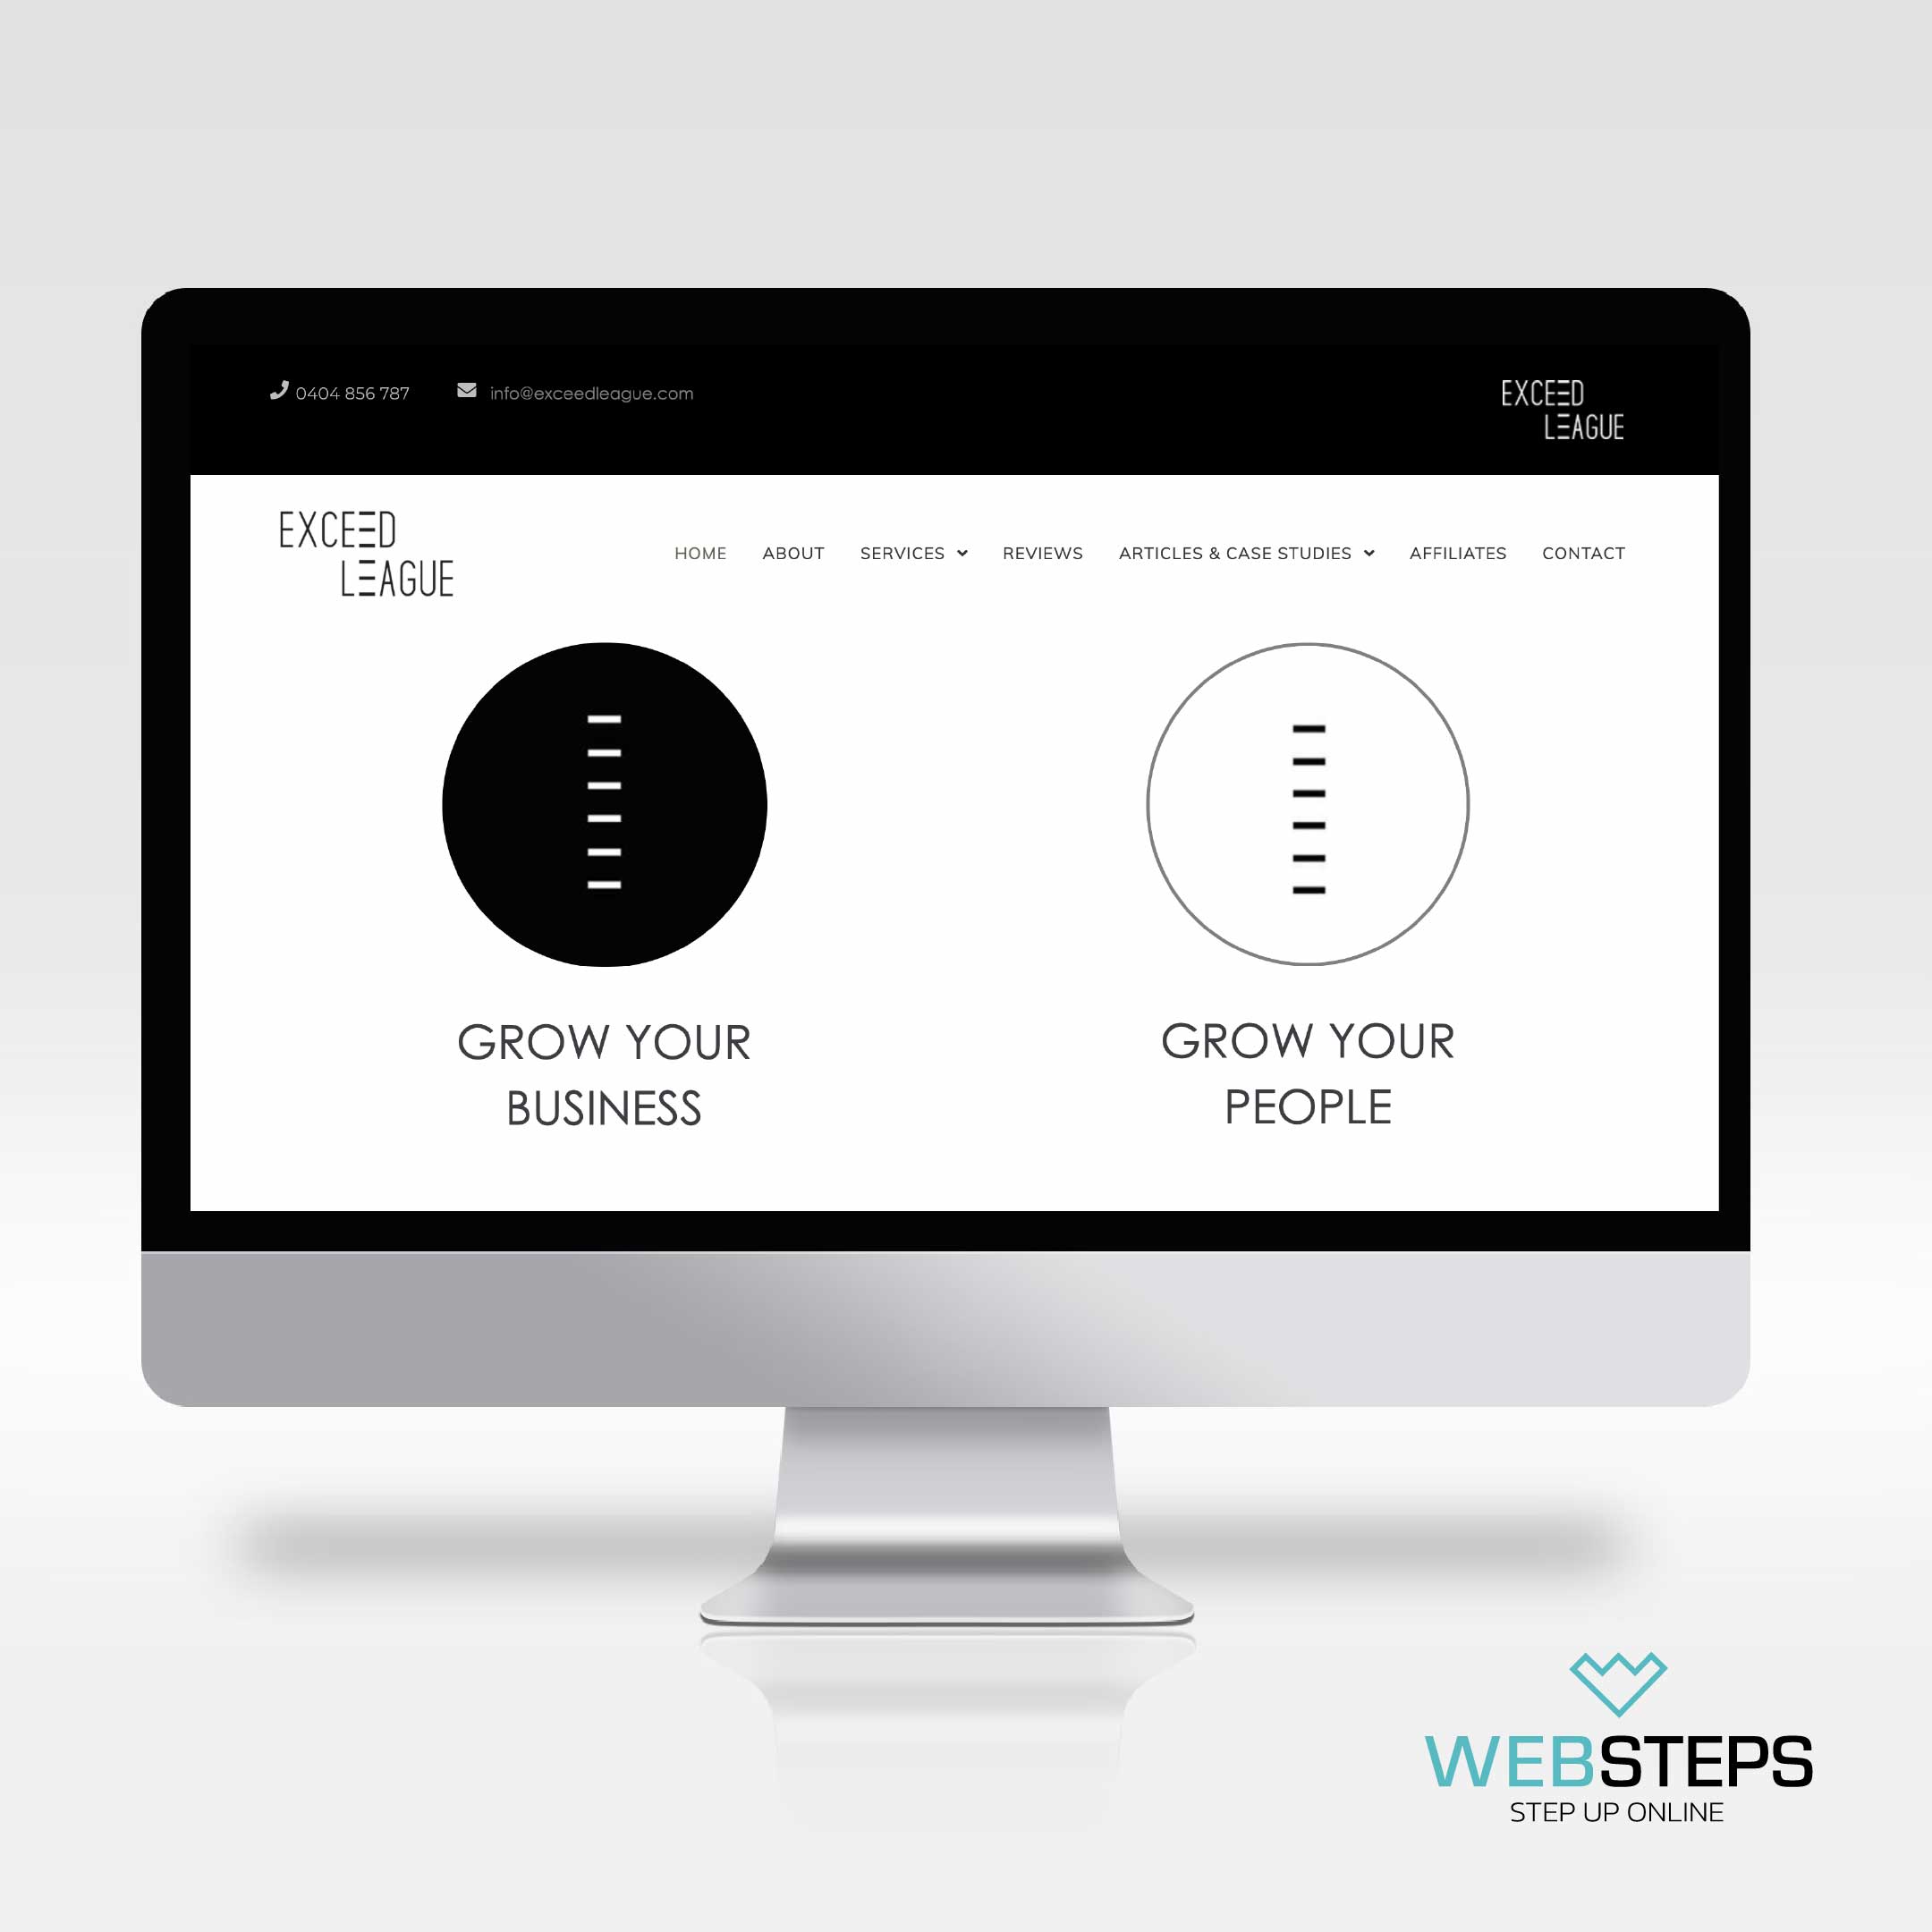 websteps-recent-projects-exceed-league